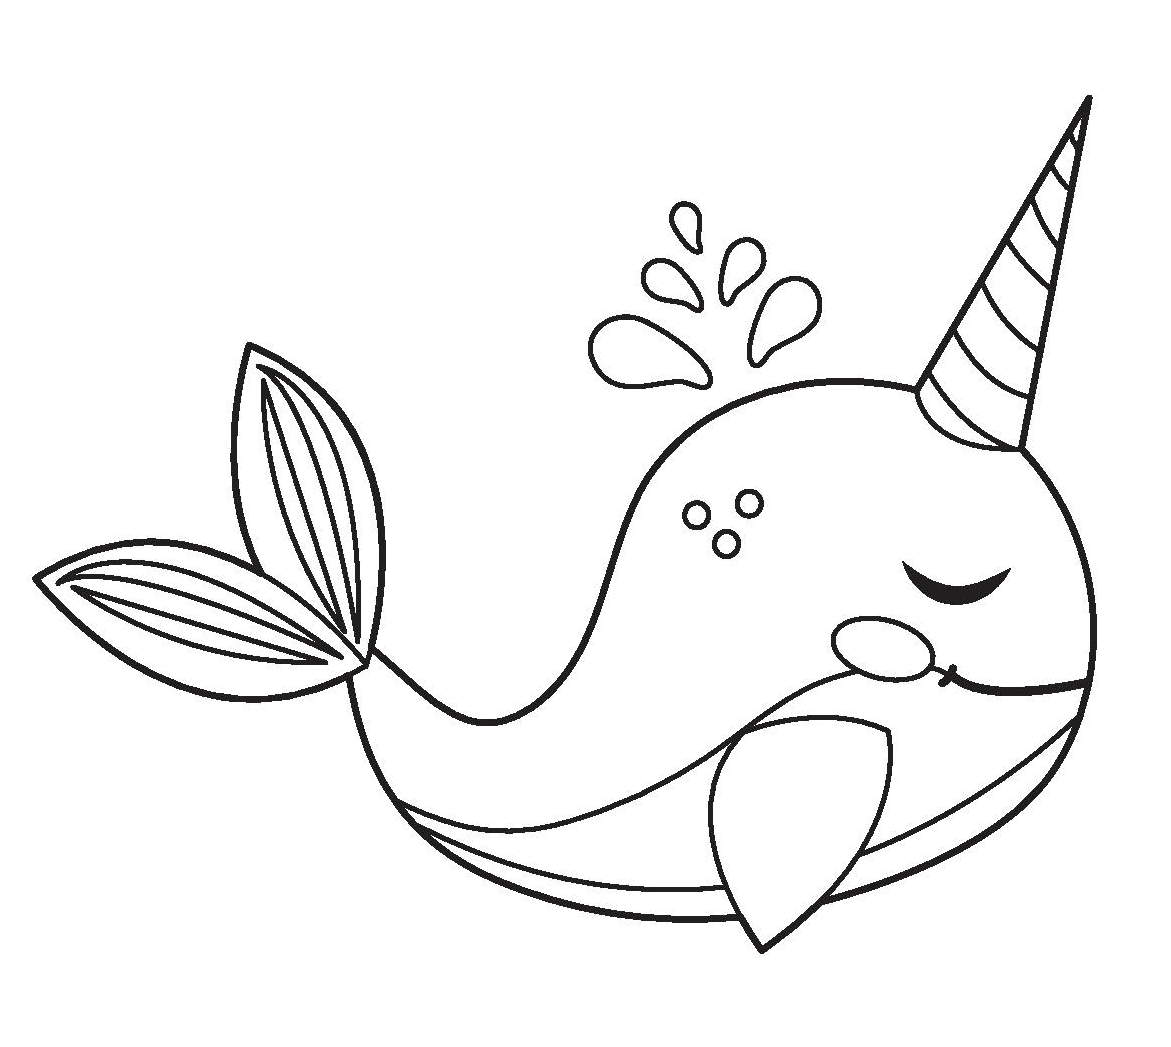 Cute Narwhal Coloring Page